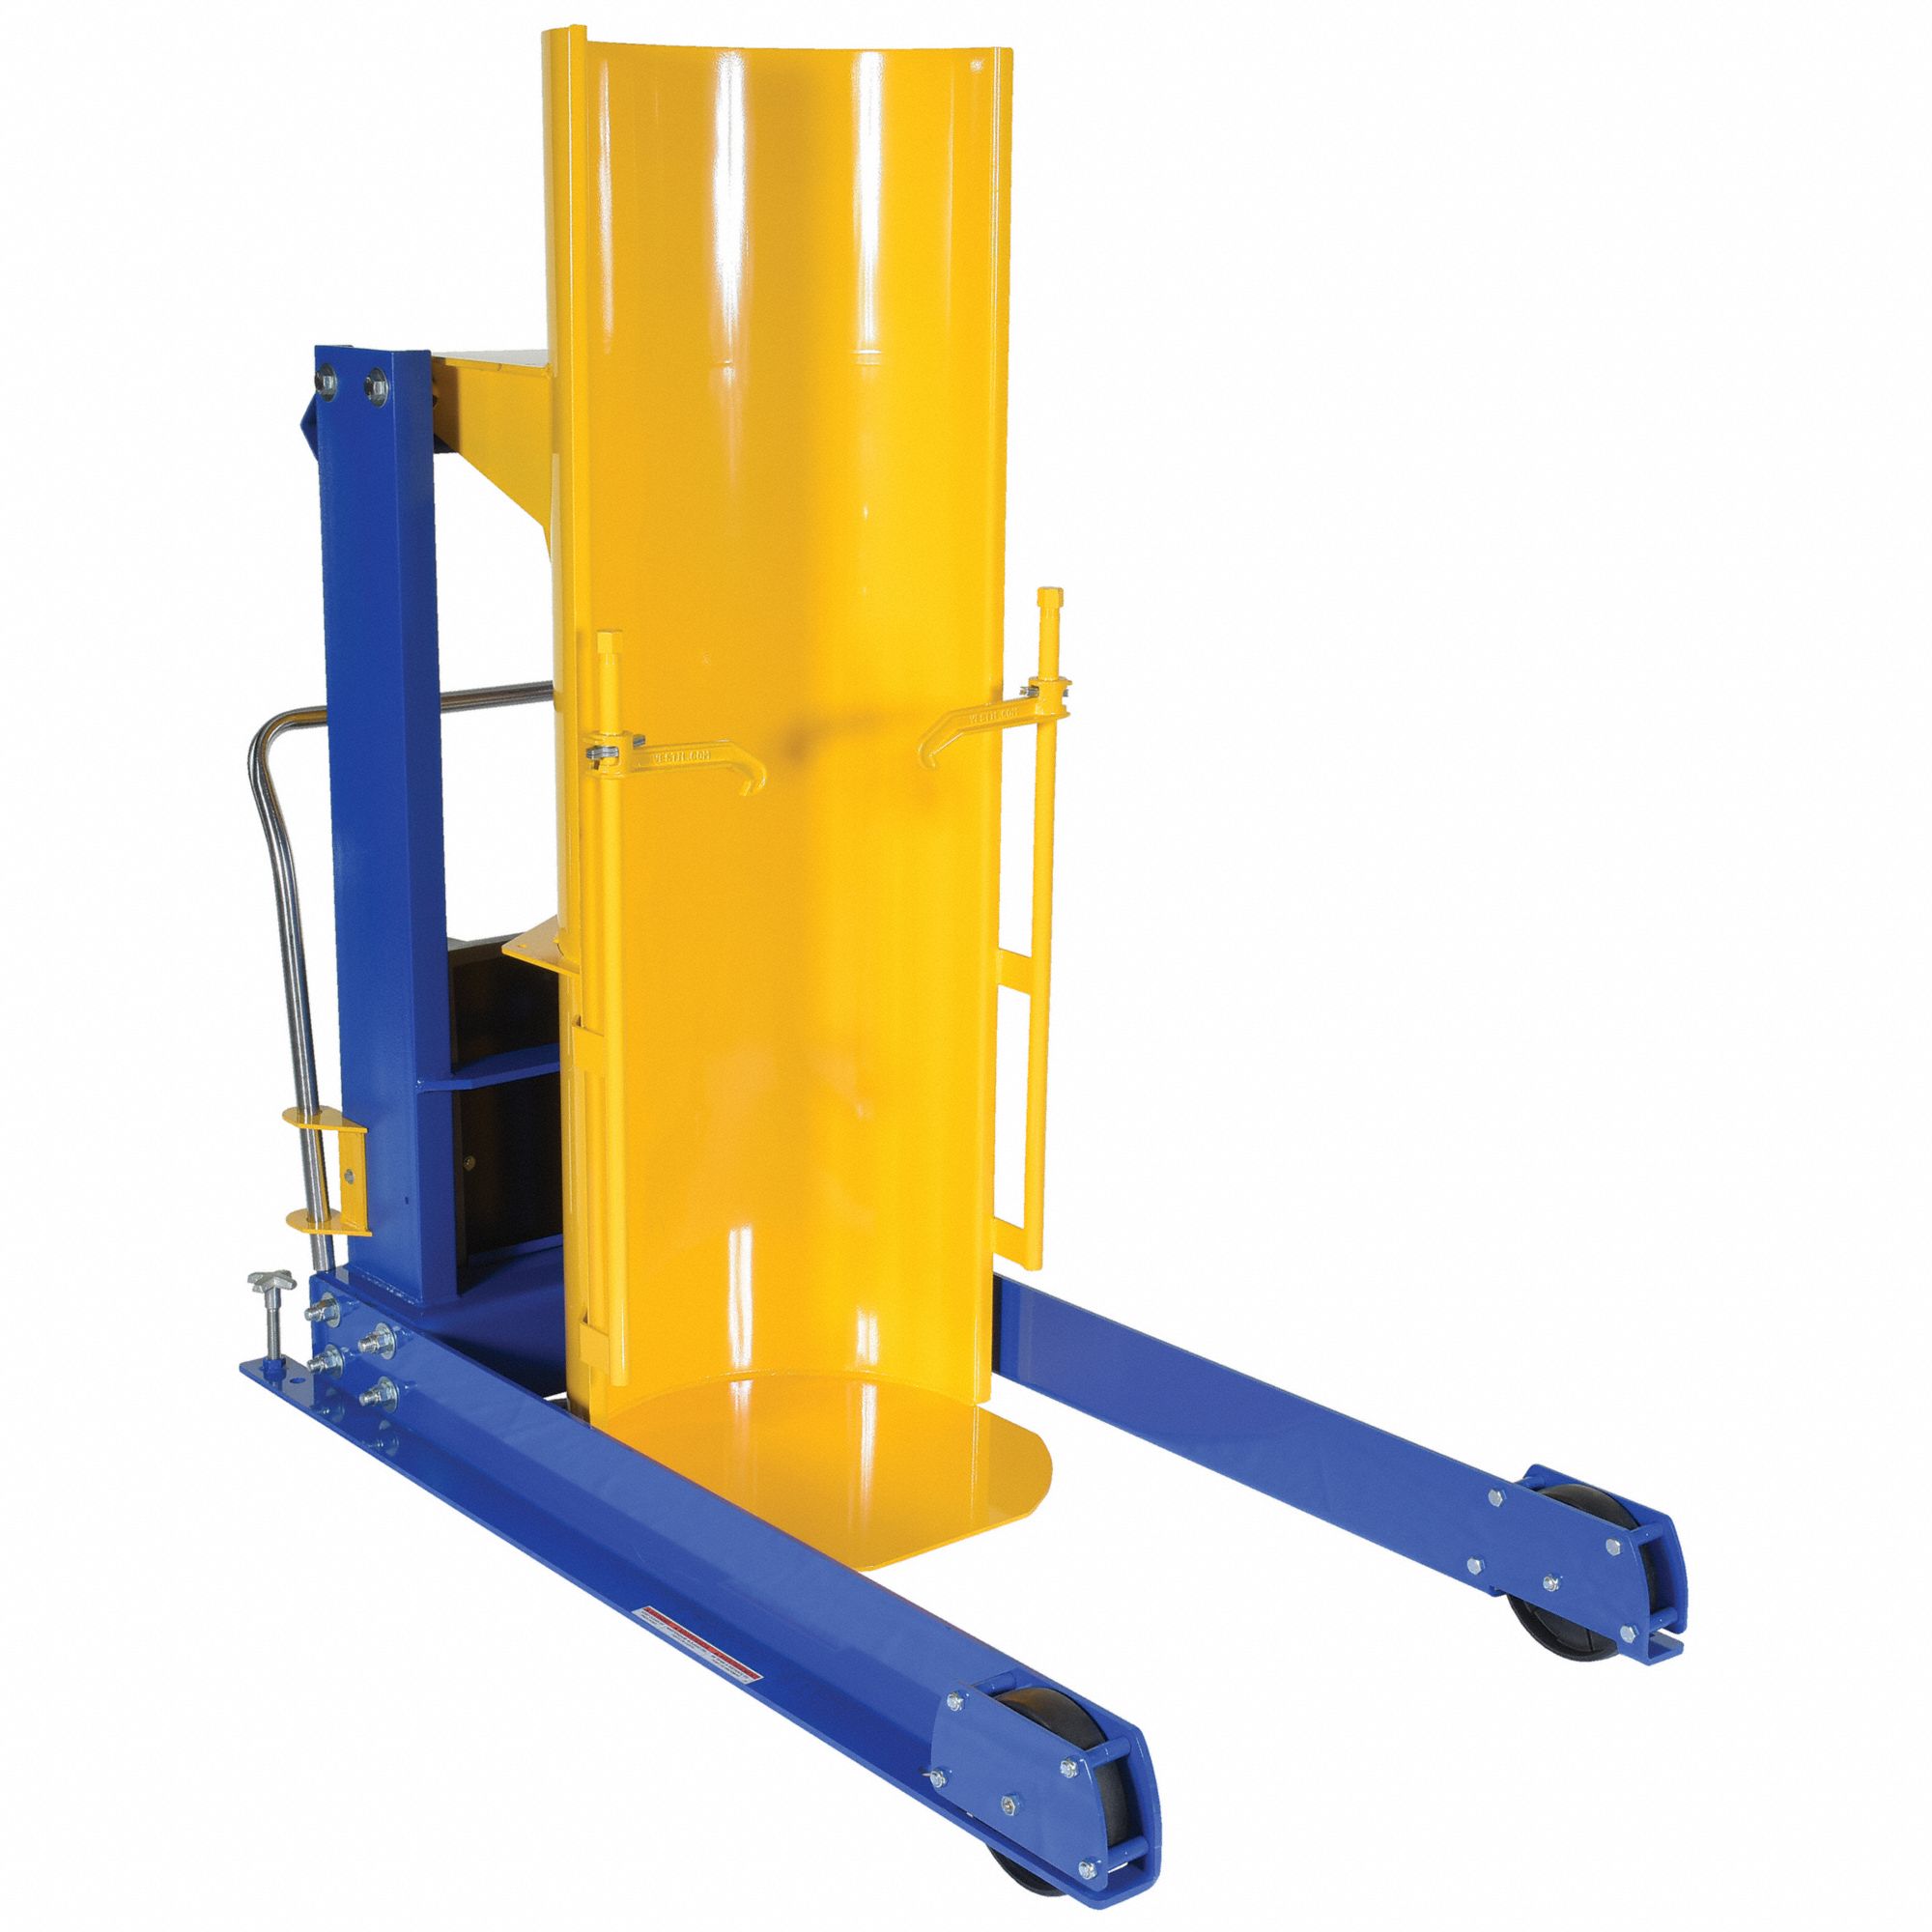 Drum Dumper Assembly Fully Assembled Drum Securing Mechanism Clamp Dump  Angle 45 Degrees Dump Height 72 in Electrical Connection Power Cord For  Container Type Drums For Drum Capacity 30 gal 55 gal